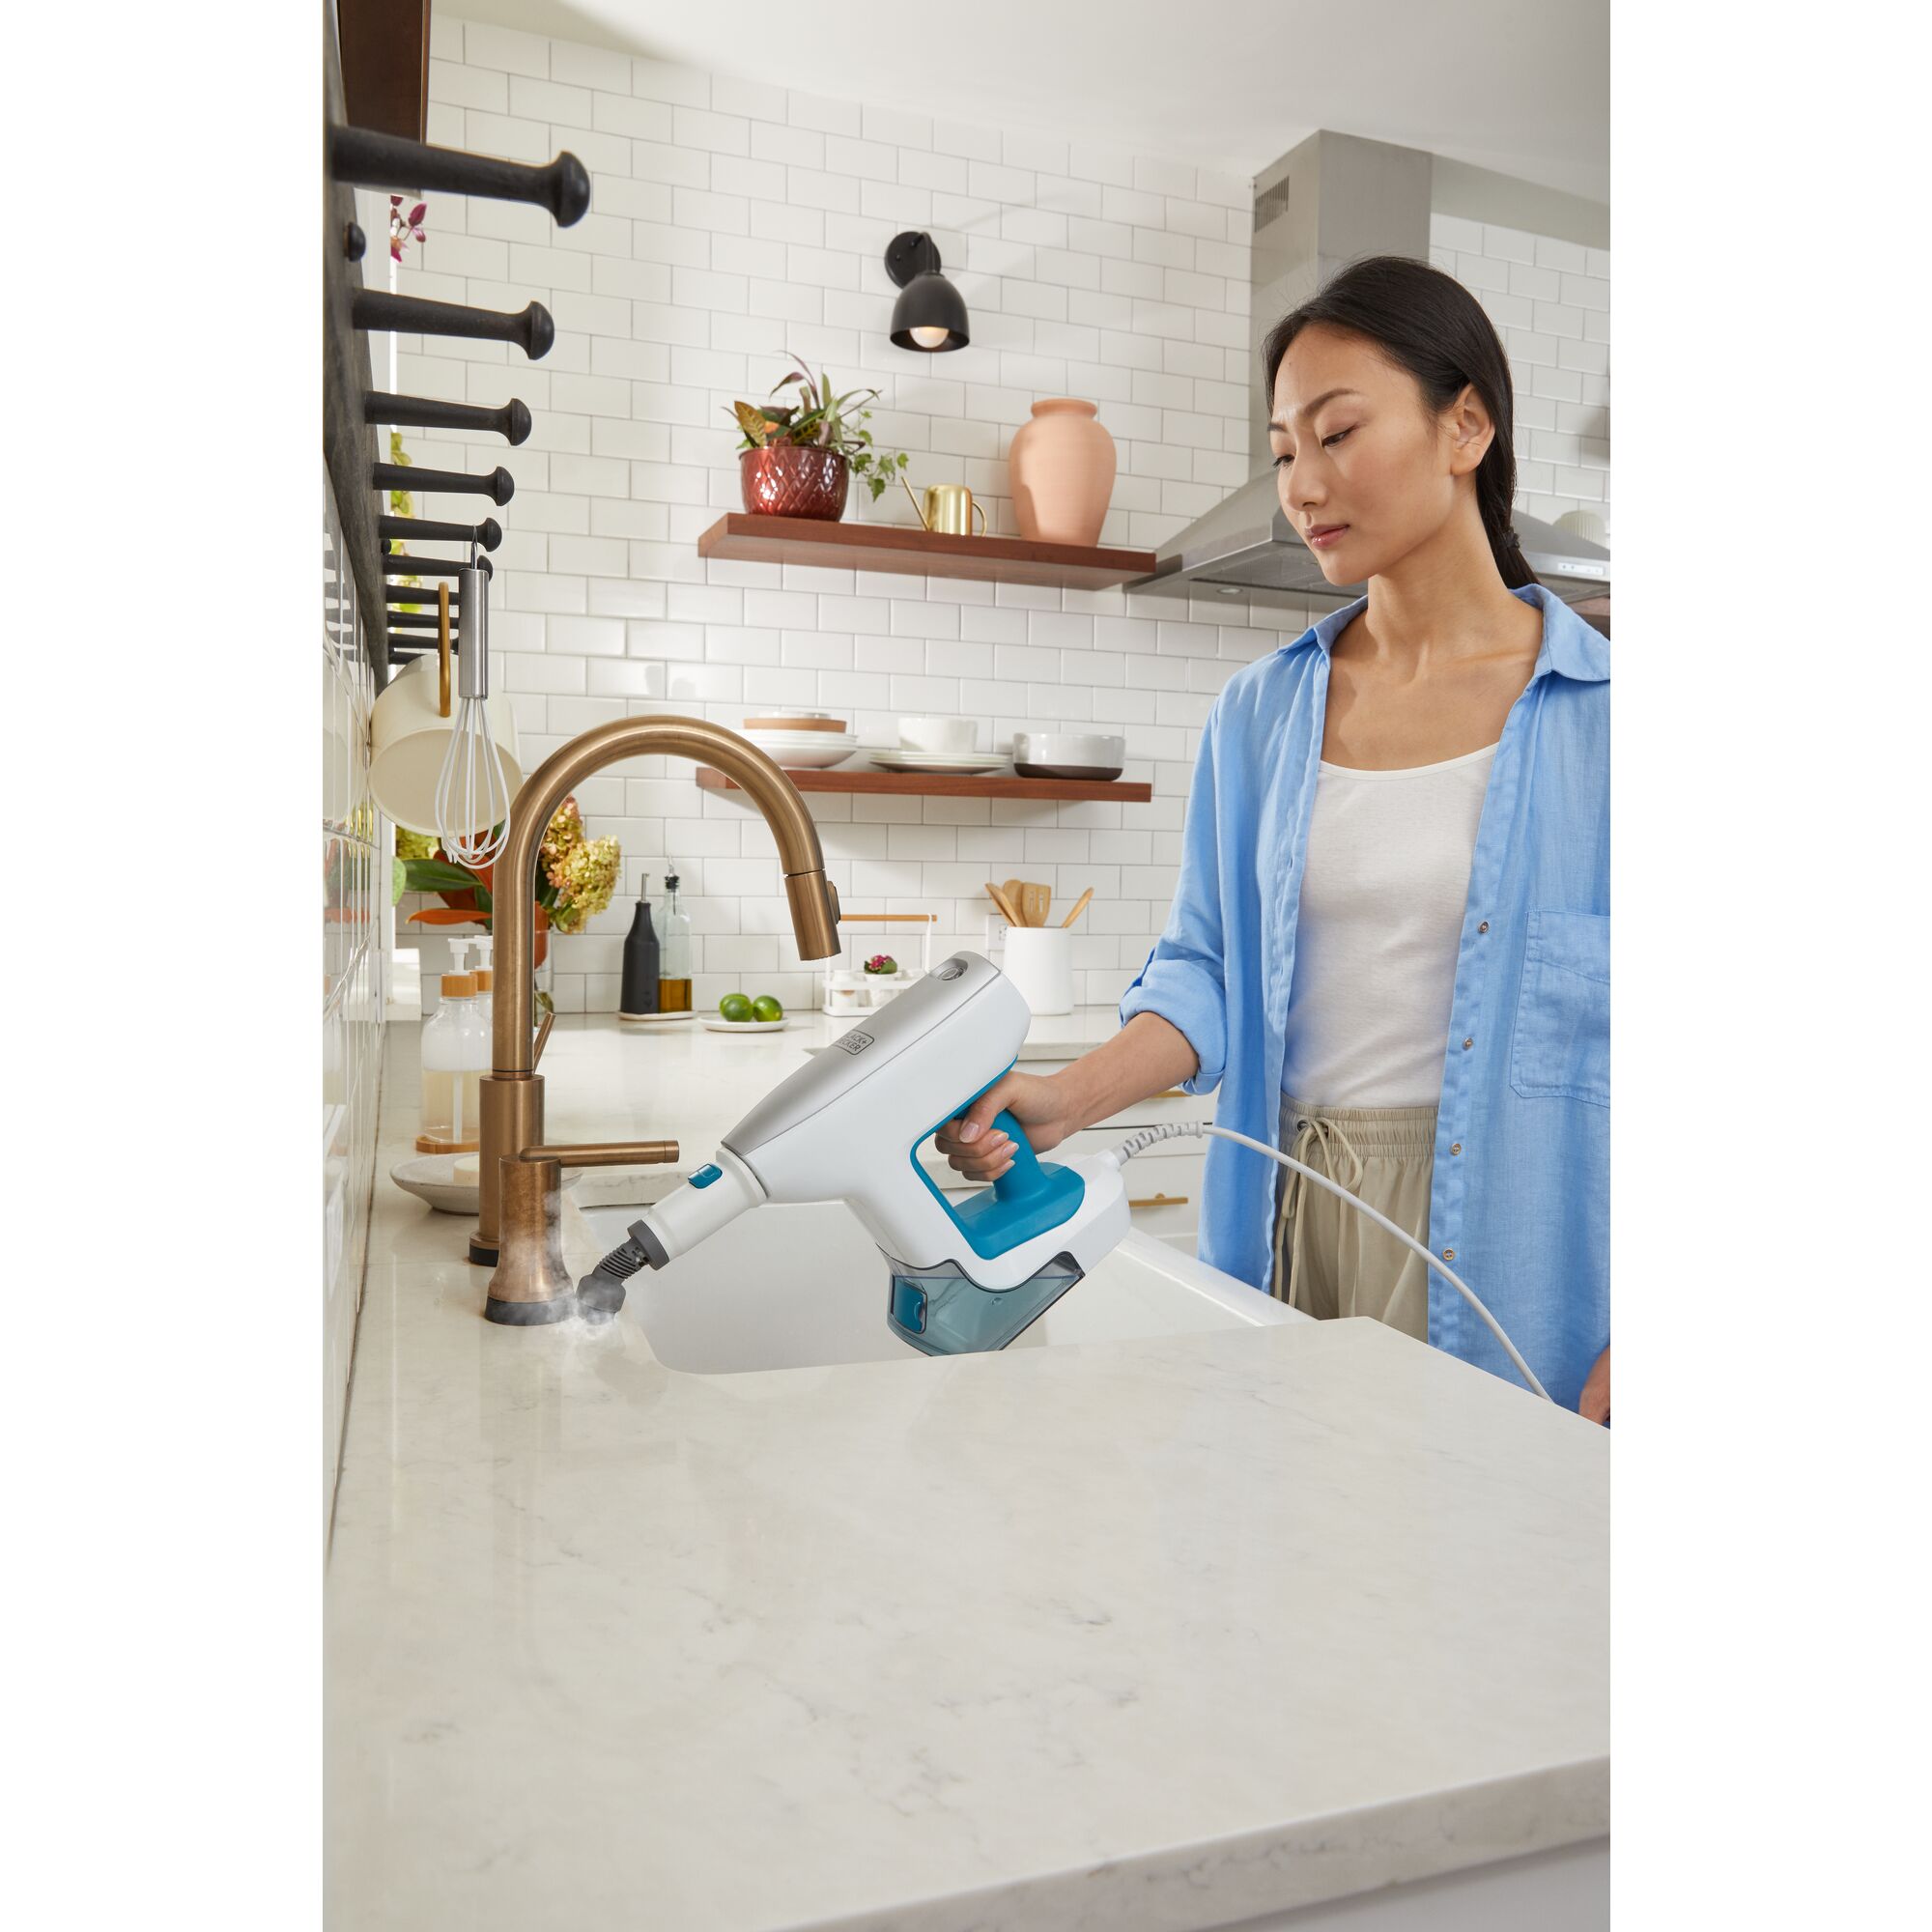 Woman filling up steam mop base with water from kitchen sink